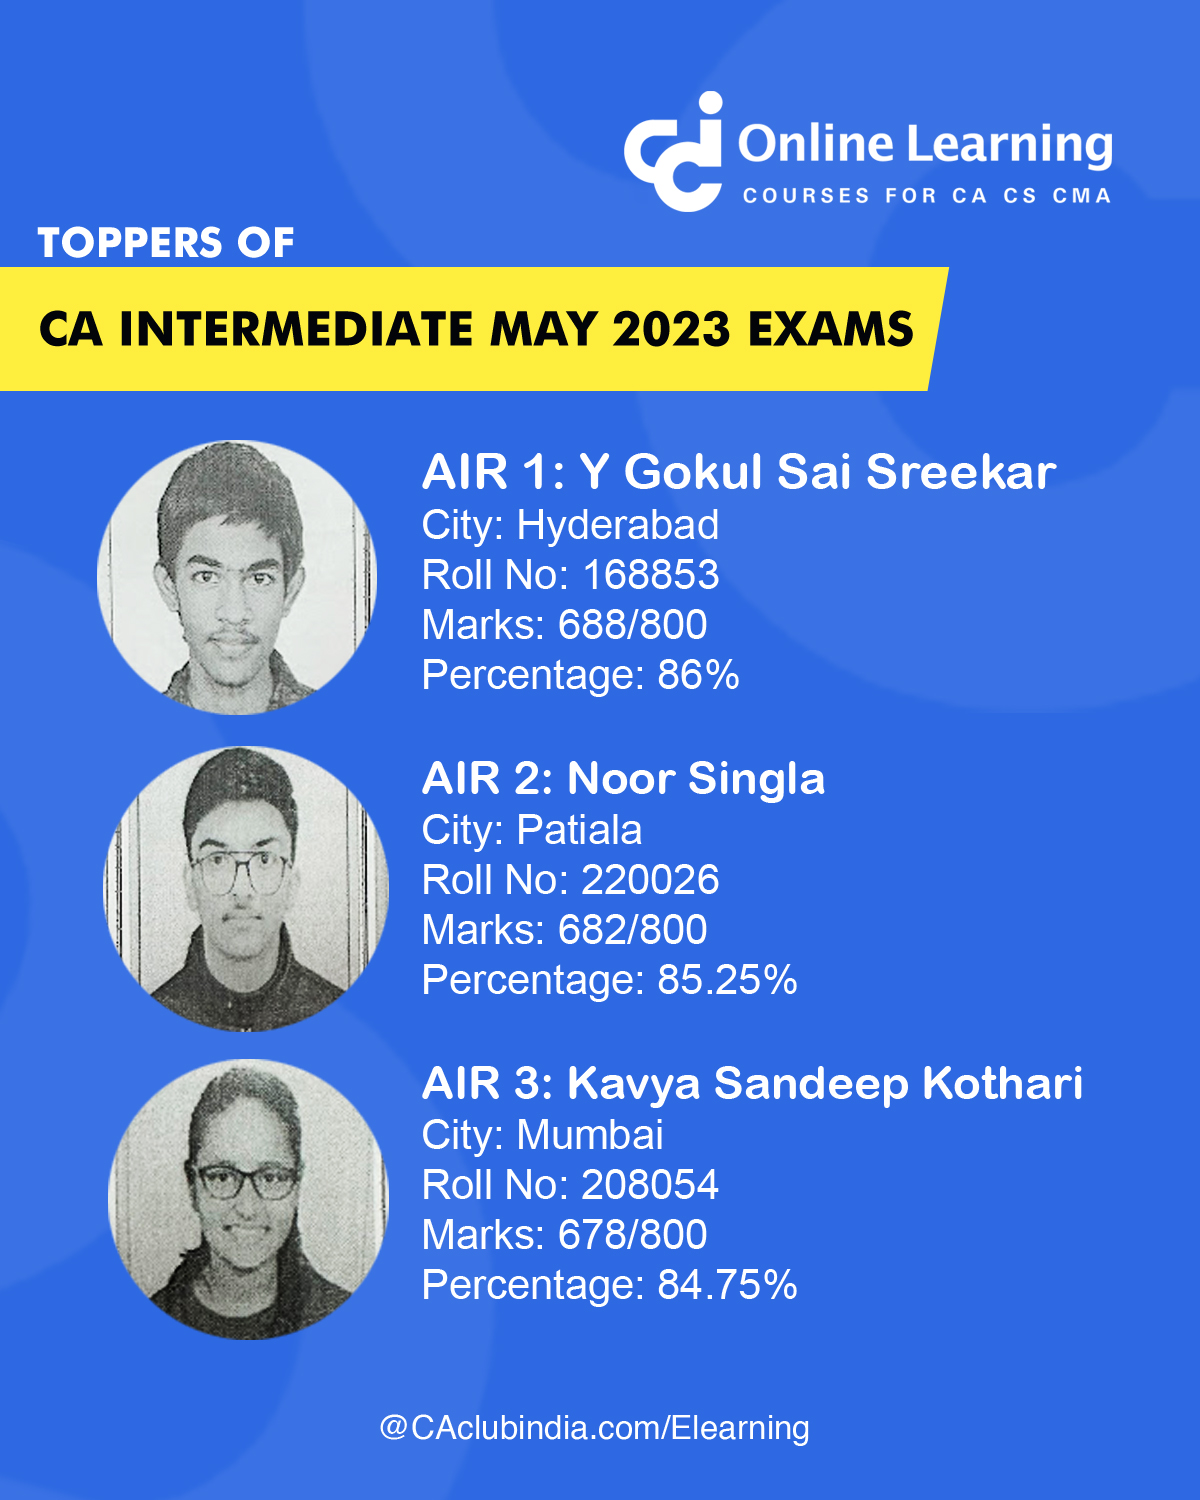 Toppers of CA Intermediate Examination held in May 2023